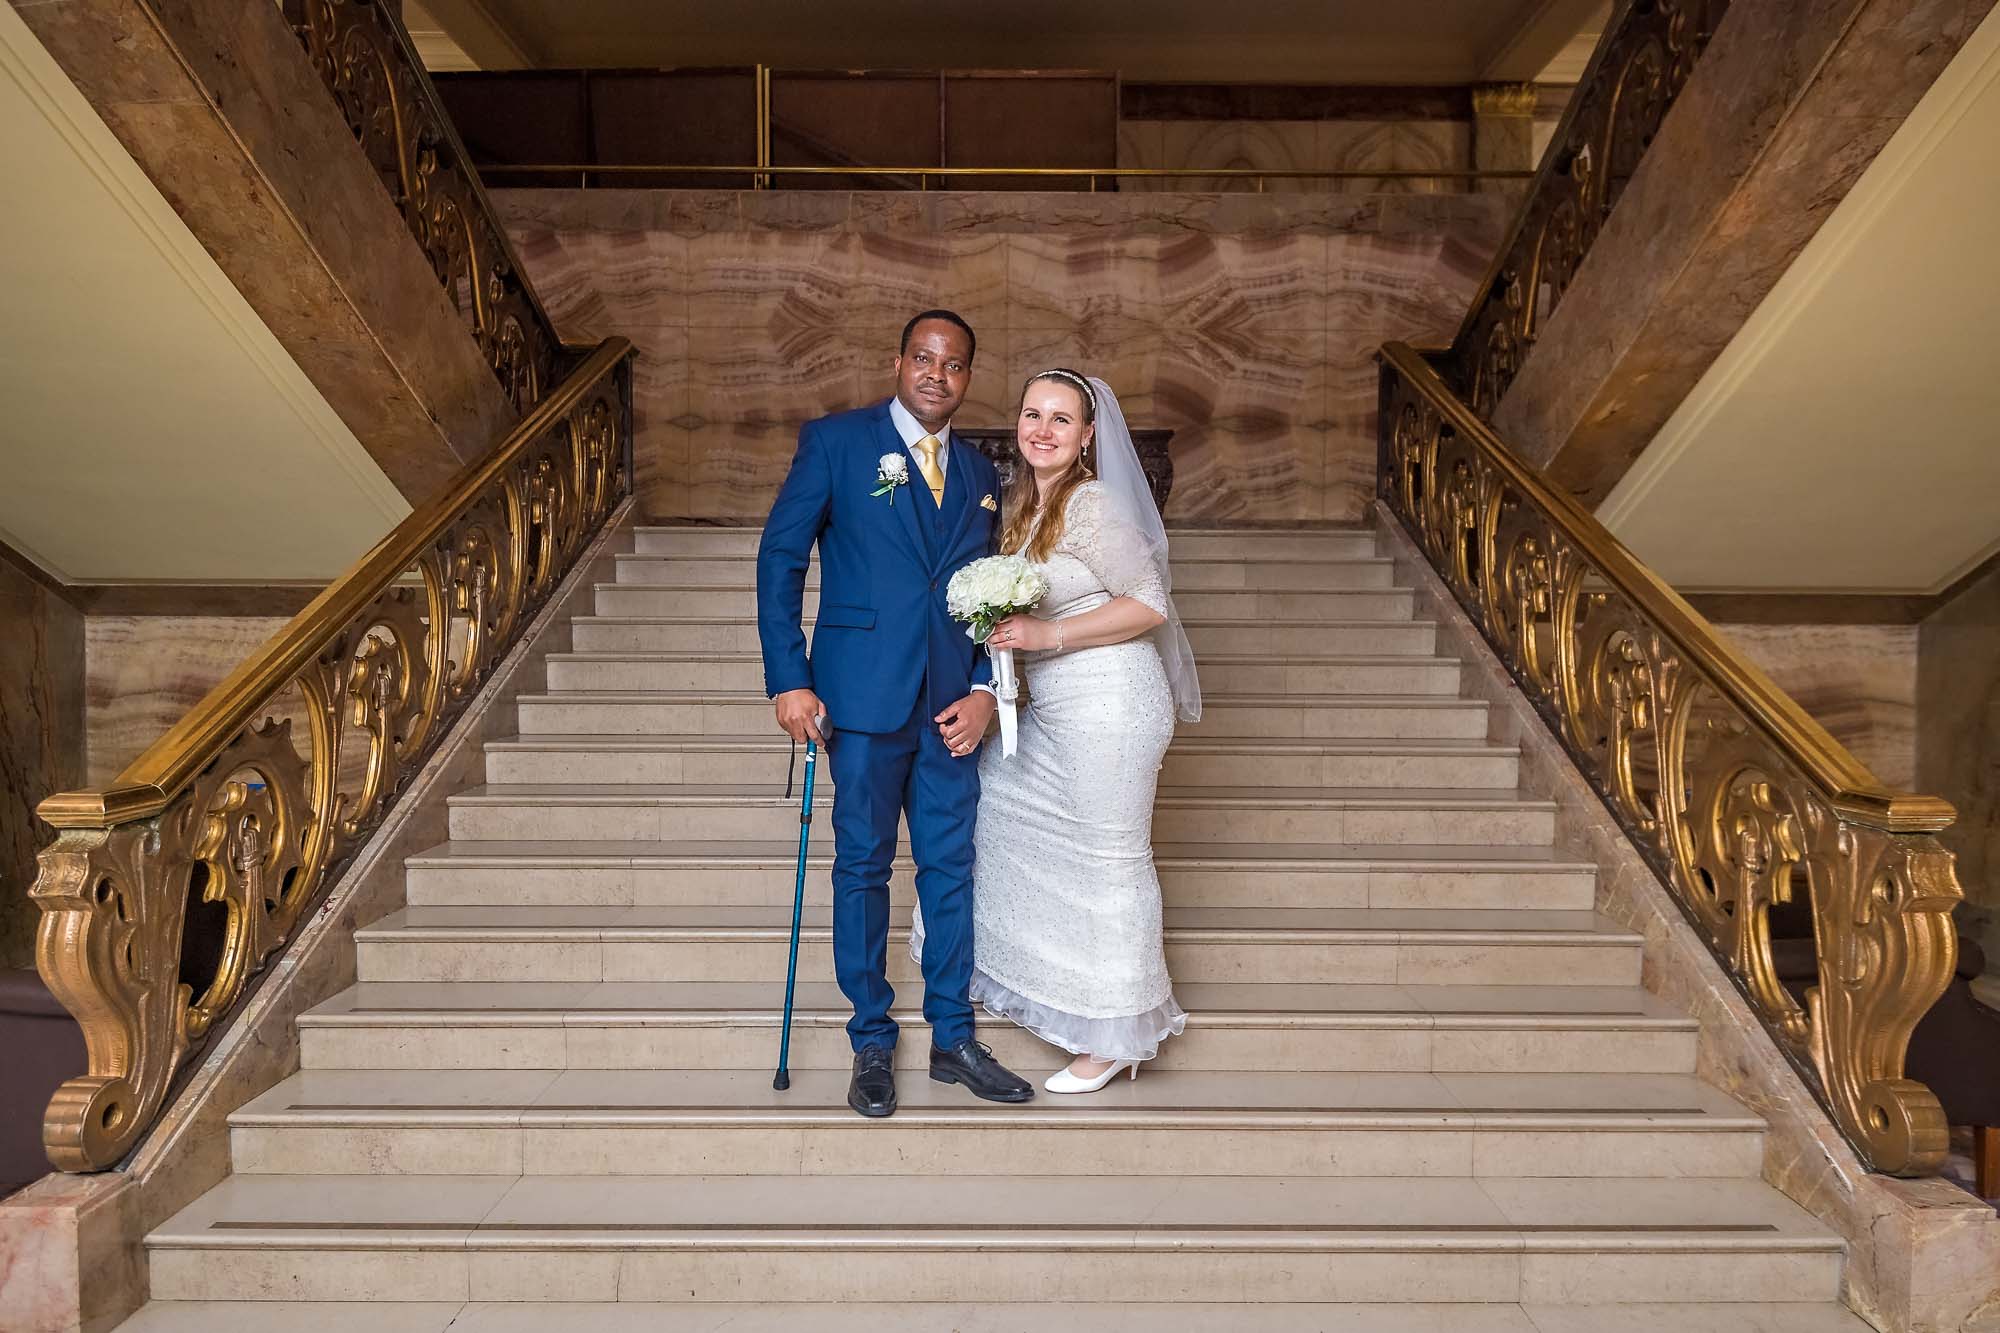 A just married couple pose on the marbled staircase of Wandsworth Town Hall